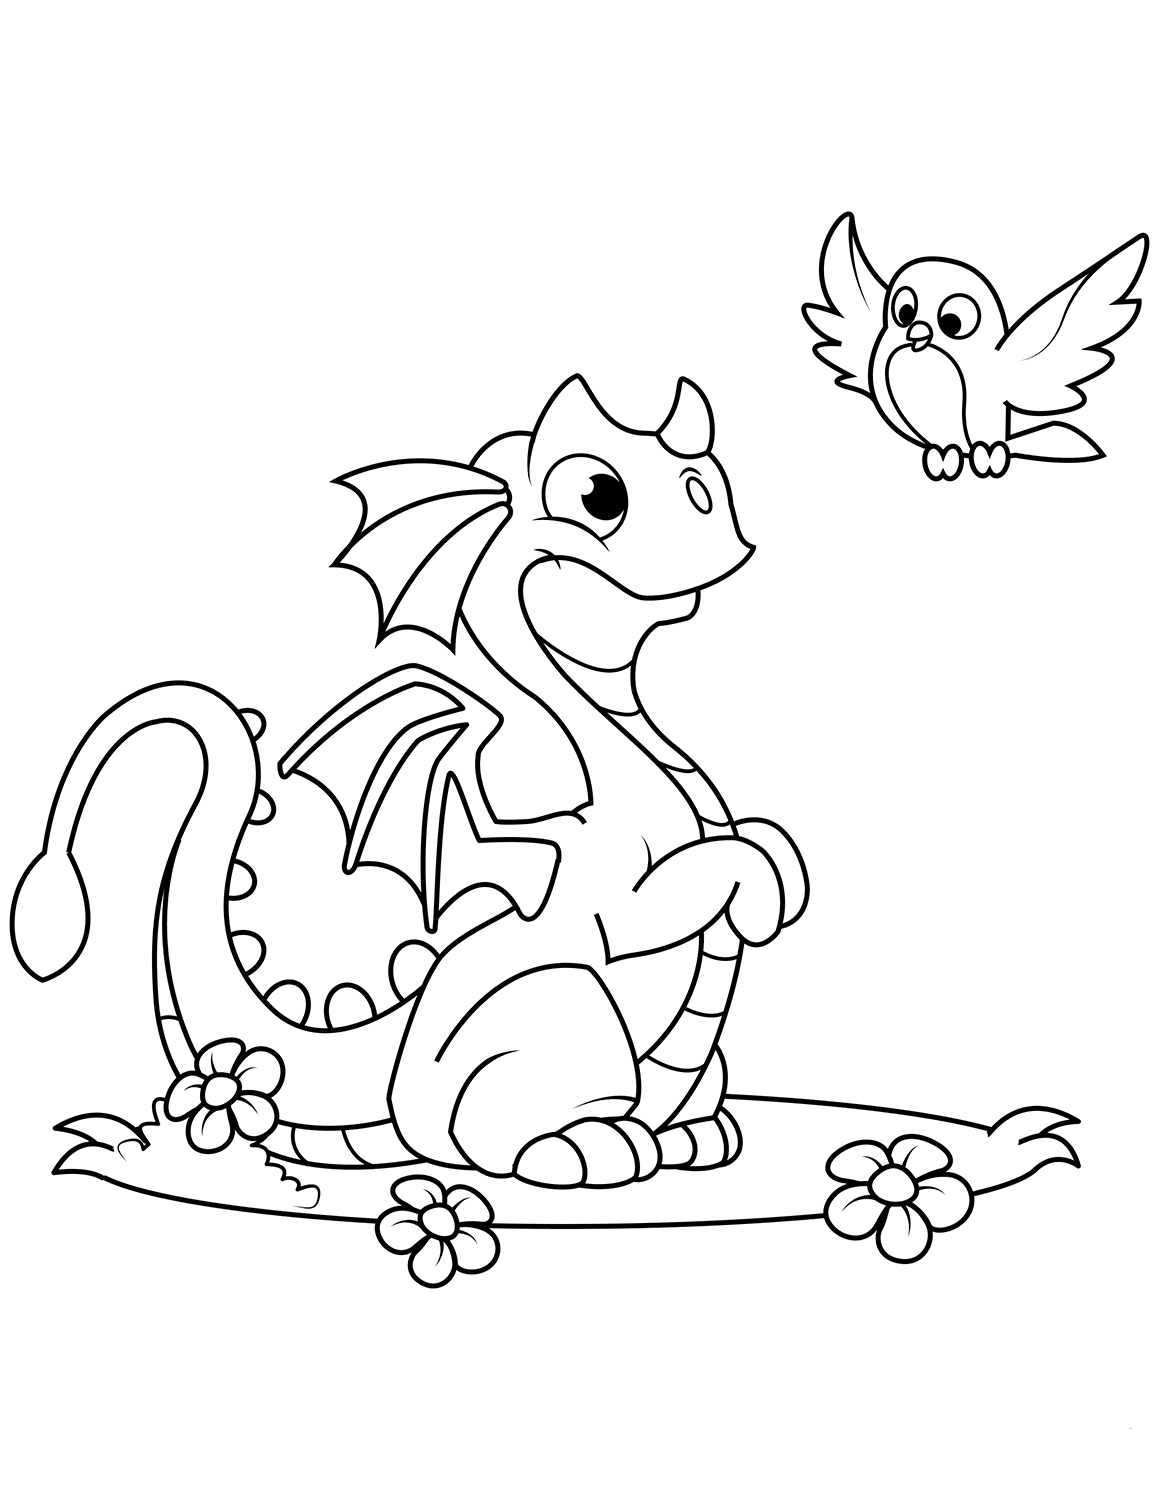 easy cute dragon coloring pages